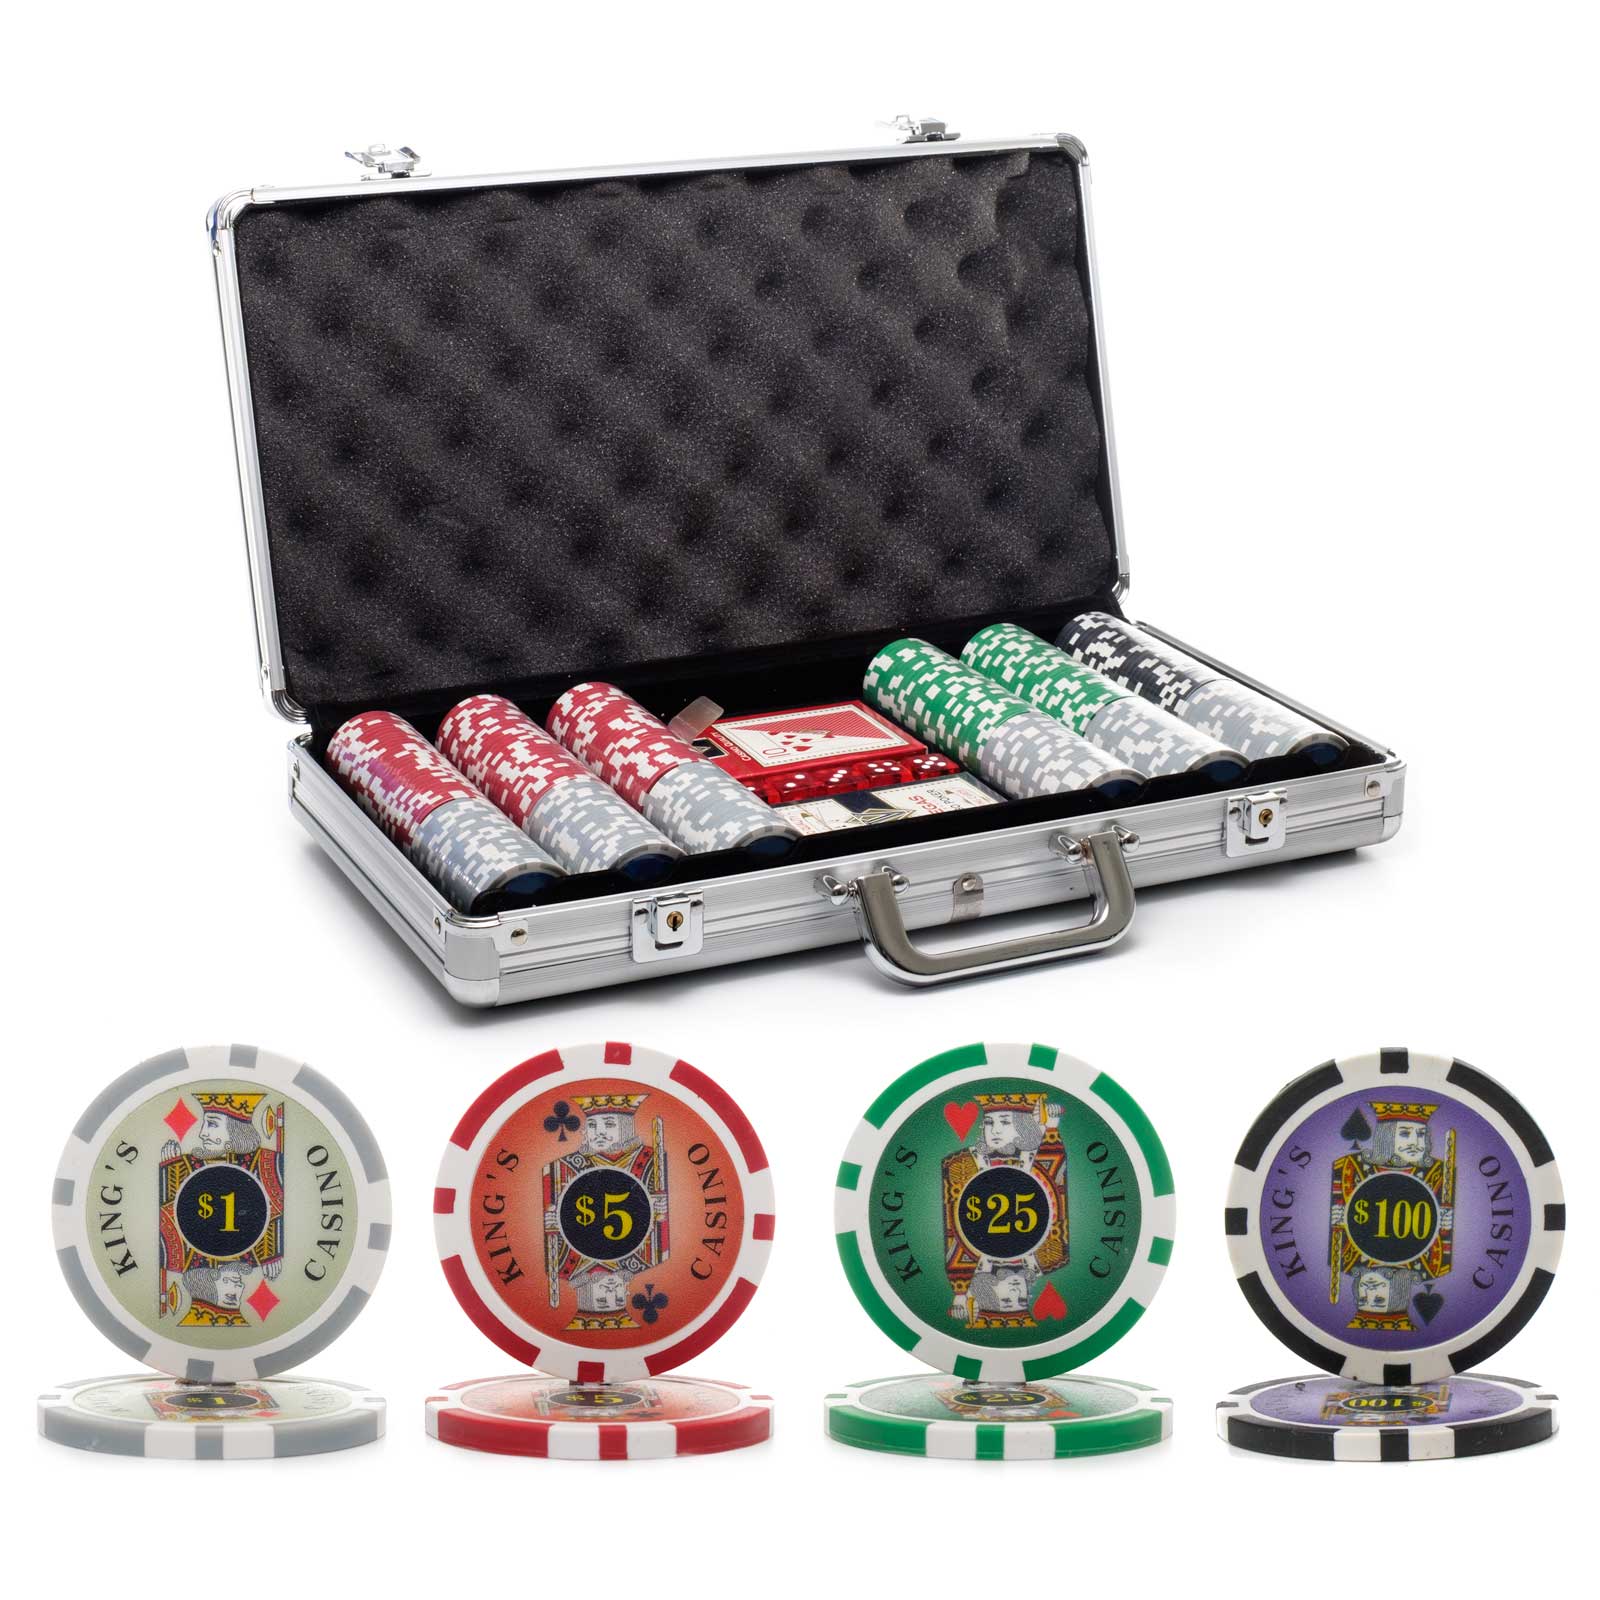 300 pc. 11.5g Kings Poker Chip Set with Aluminum Case